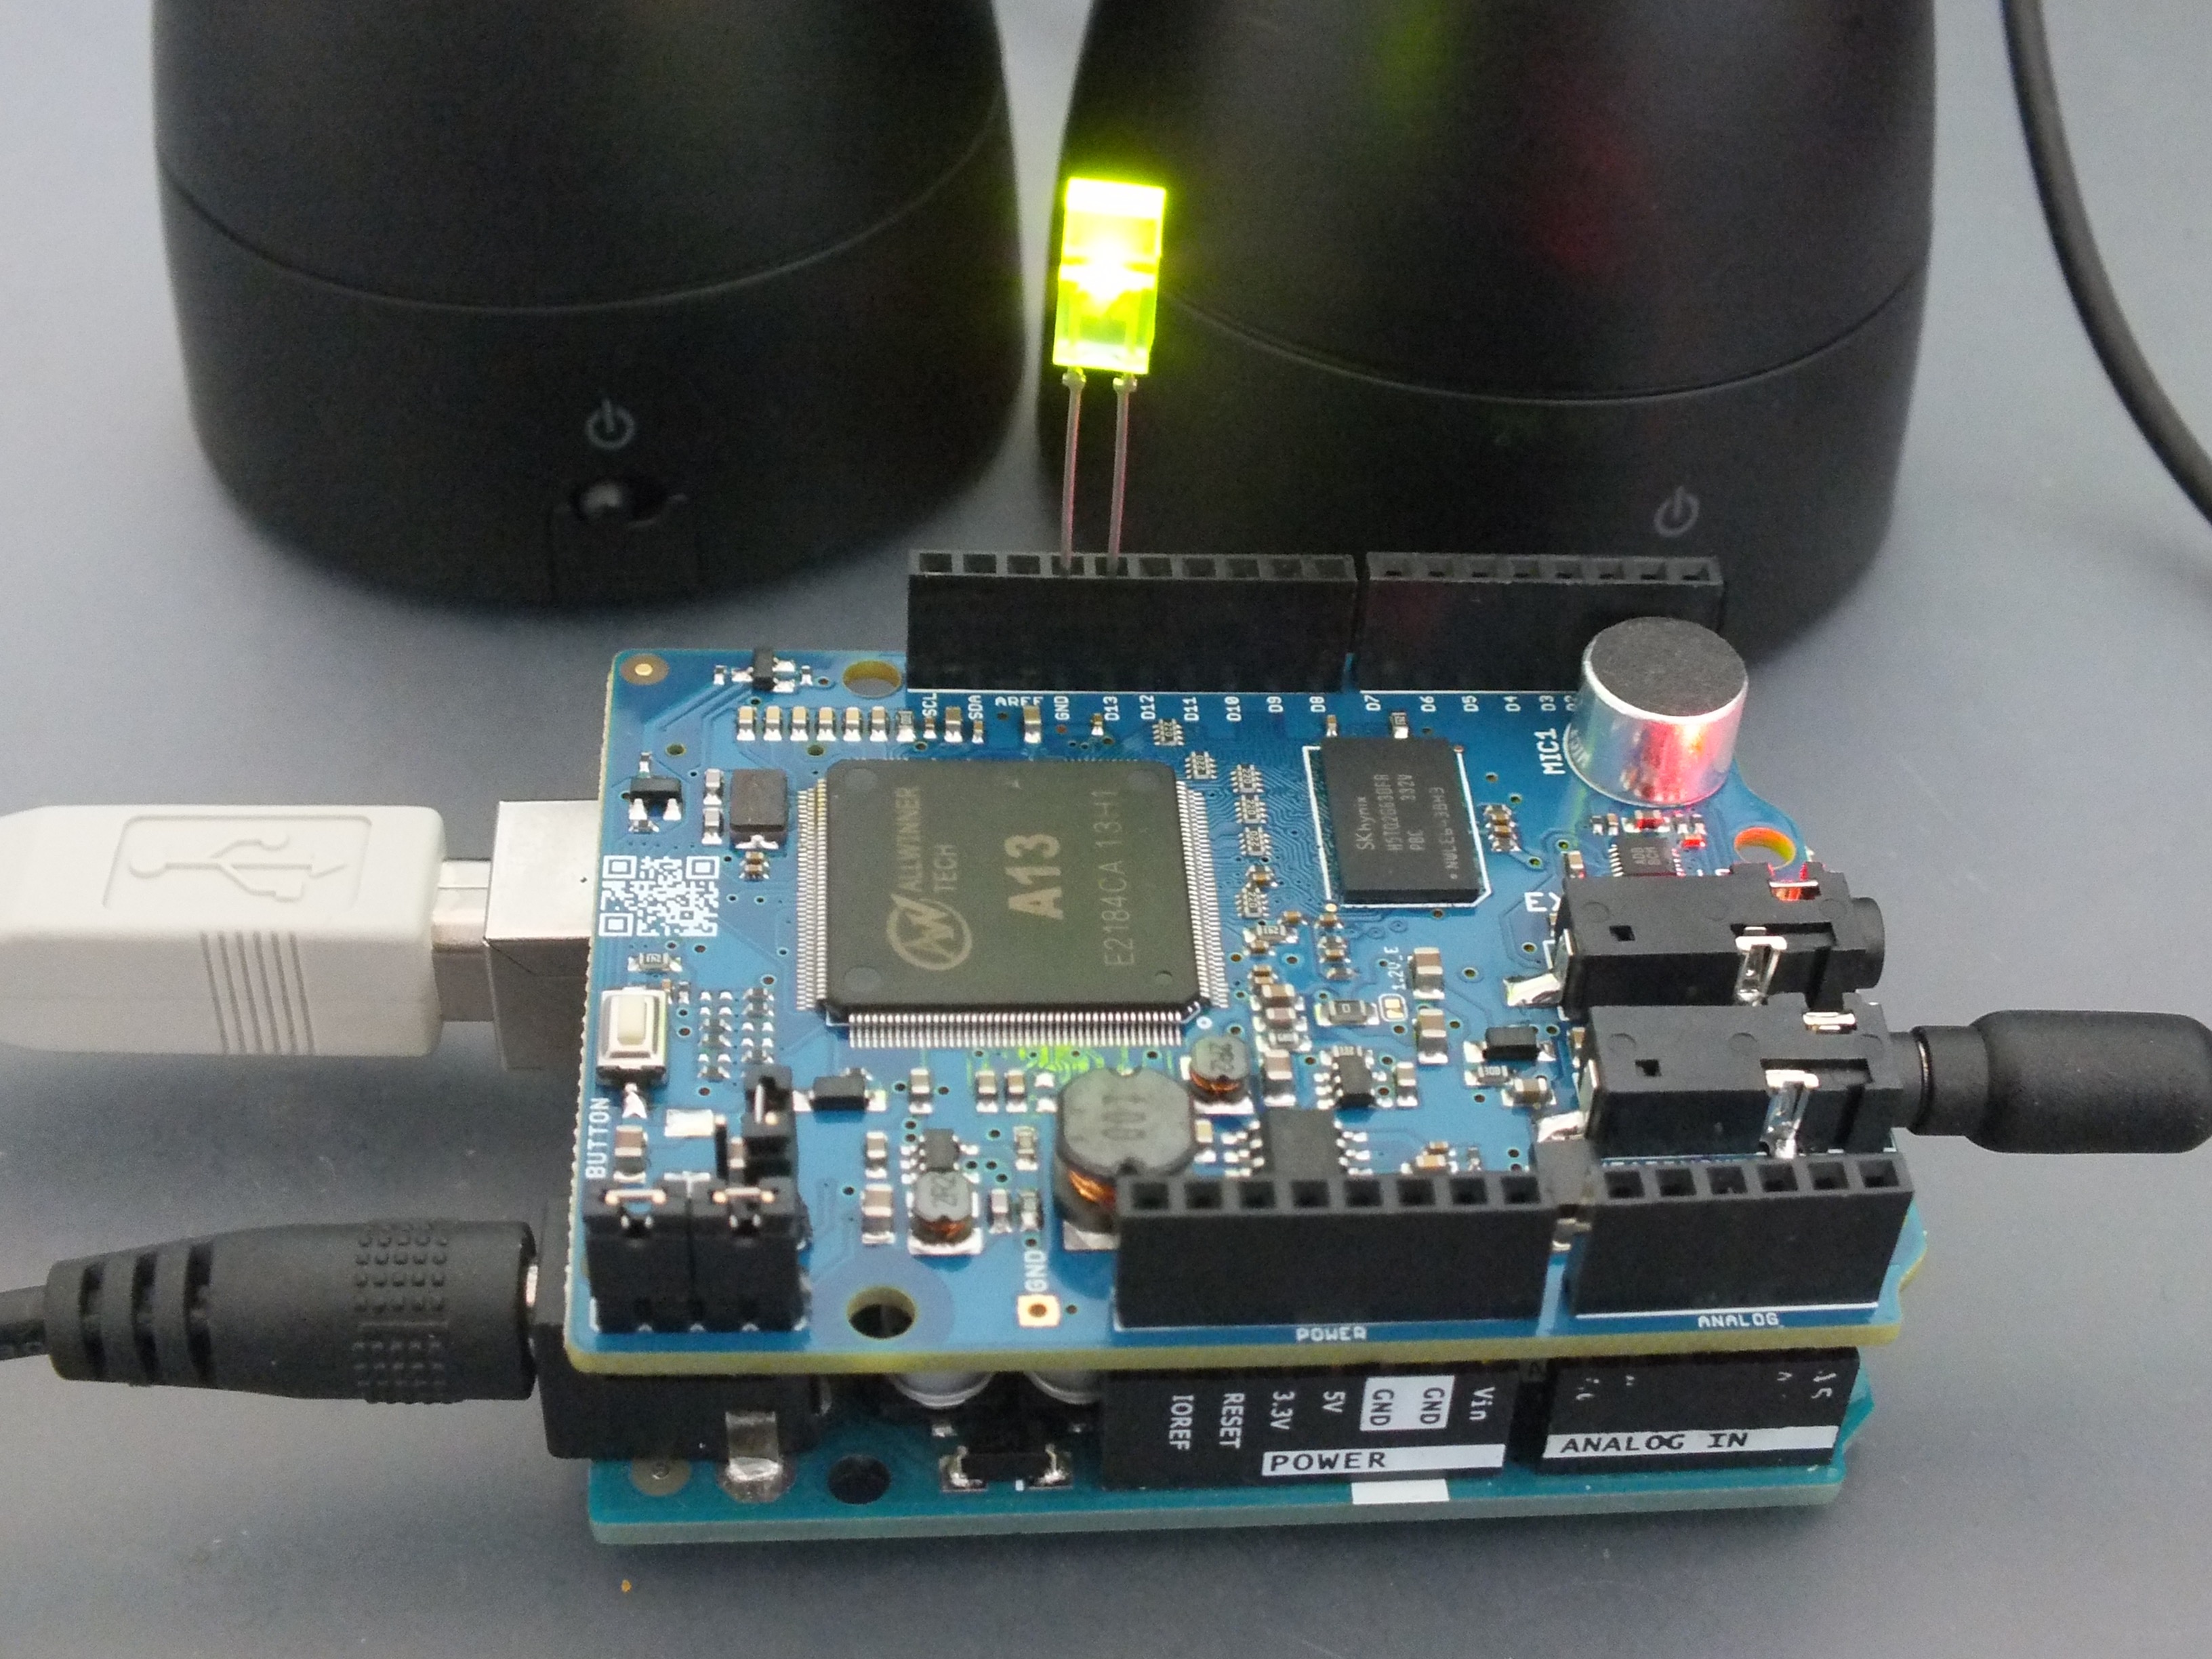 MOVI - a "cloud-free" Speech Recognizer and Voice Synthesizer Arduino Shield for Makers